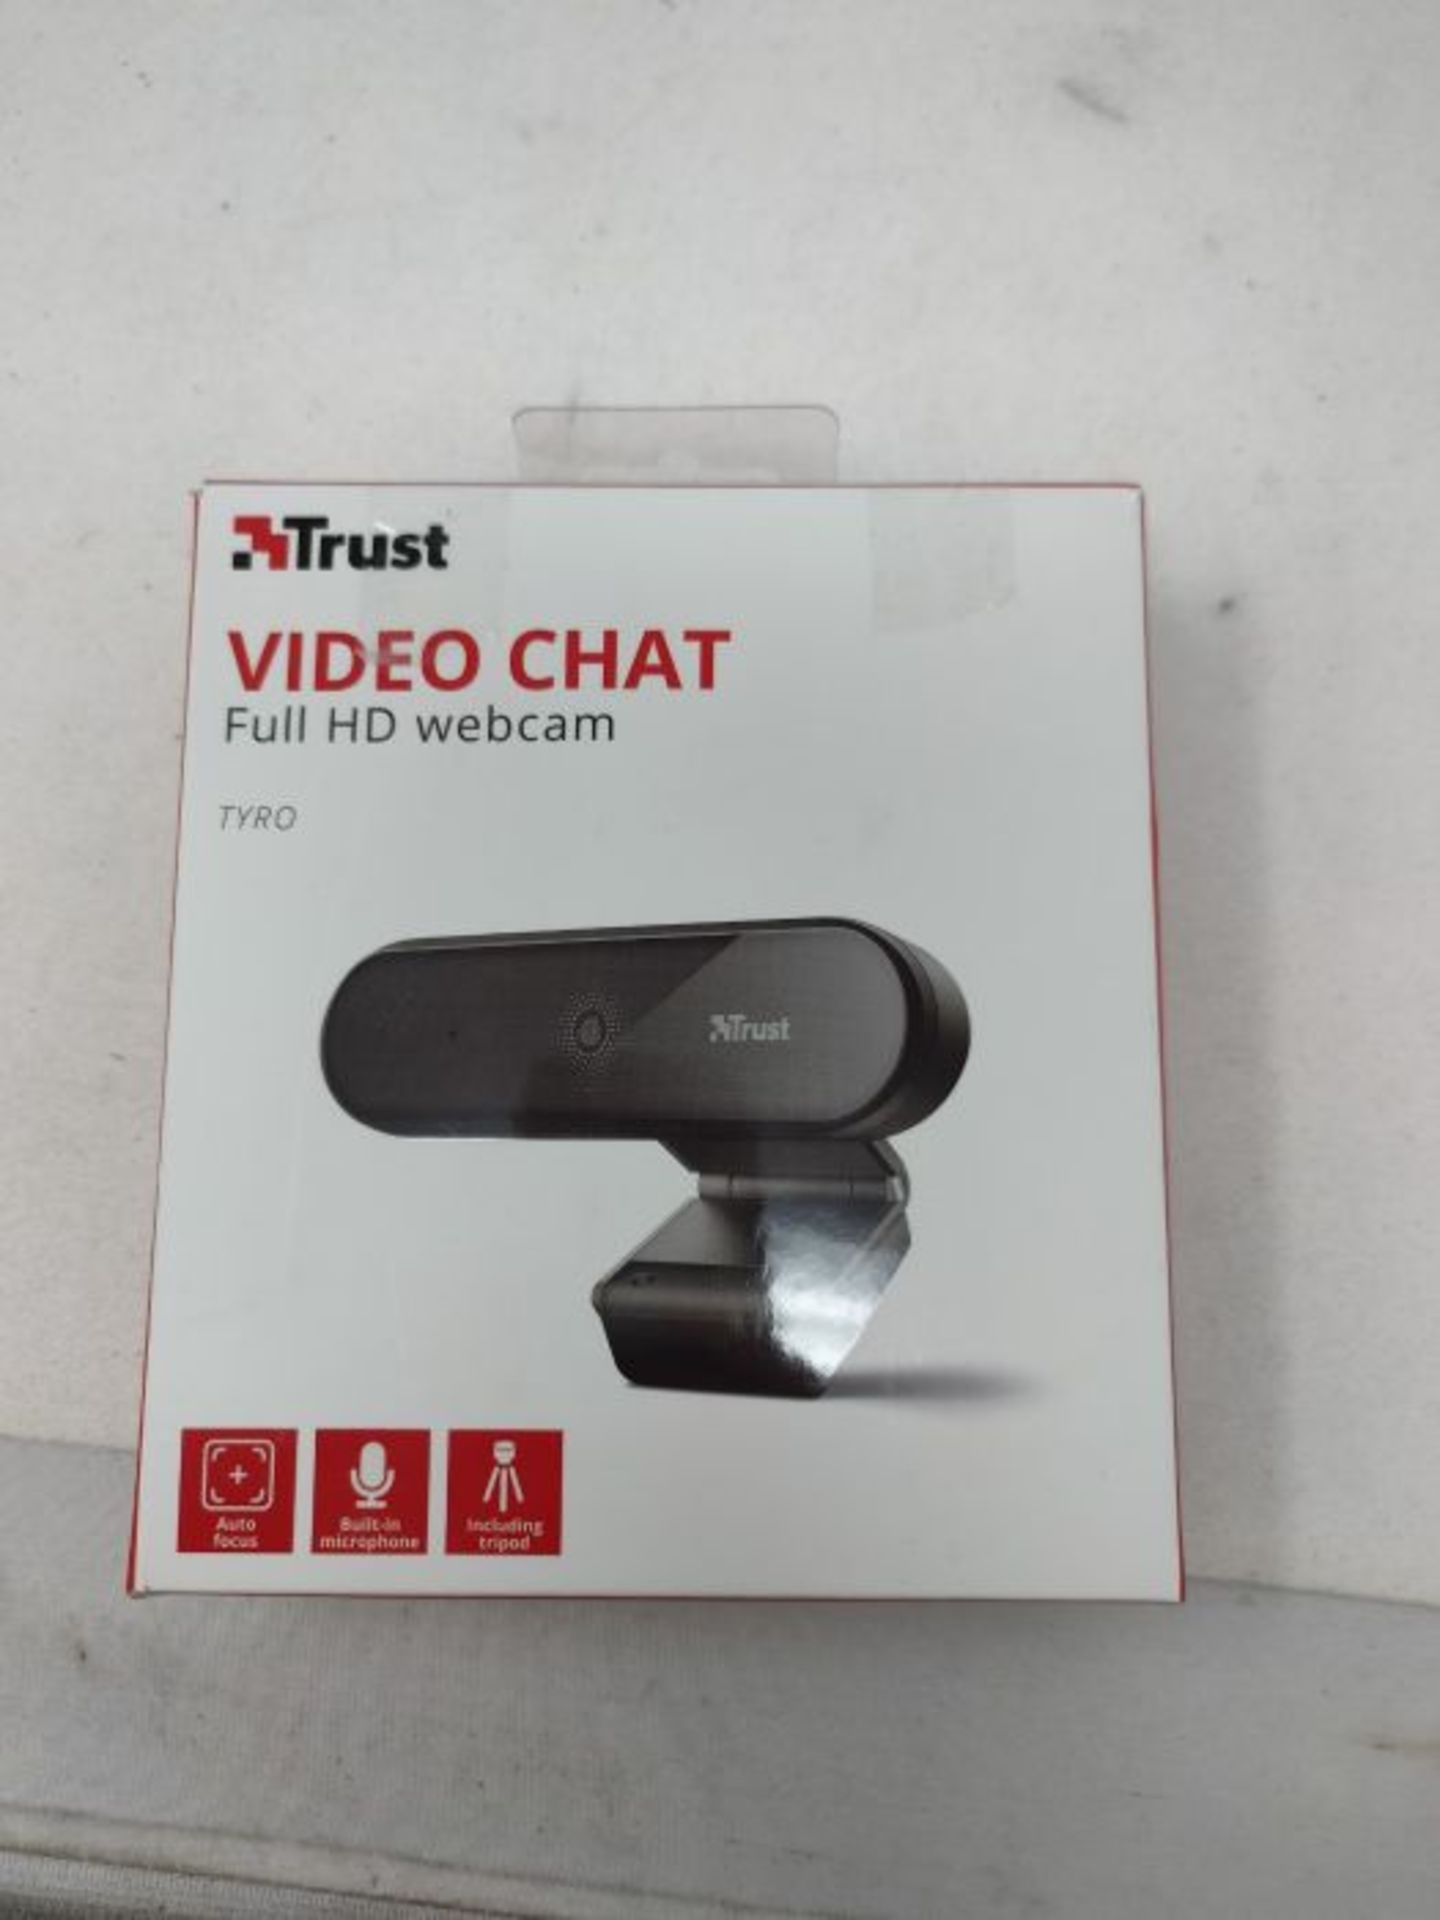 Trust 23637 Tyro Webcam Full HD 1080p with Microphone for PC (Wide Angle, Auto Focus, - Image 2 of 3